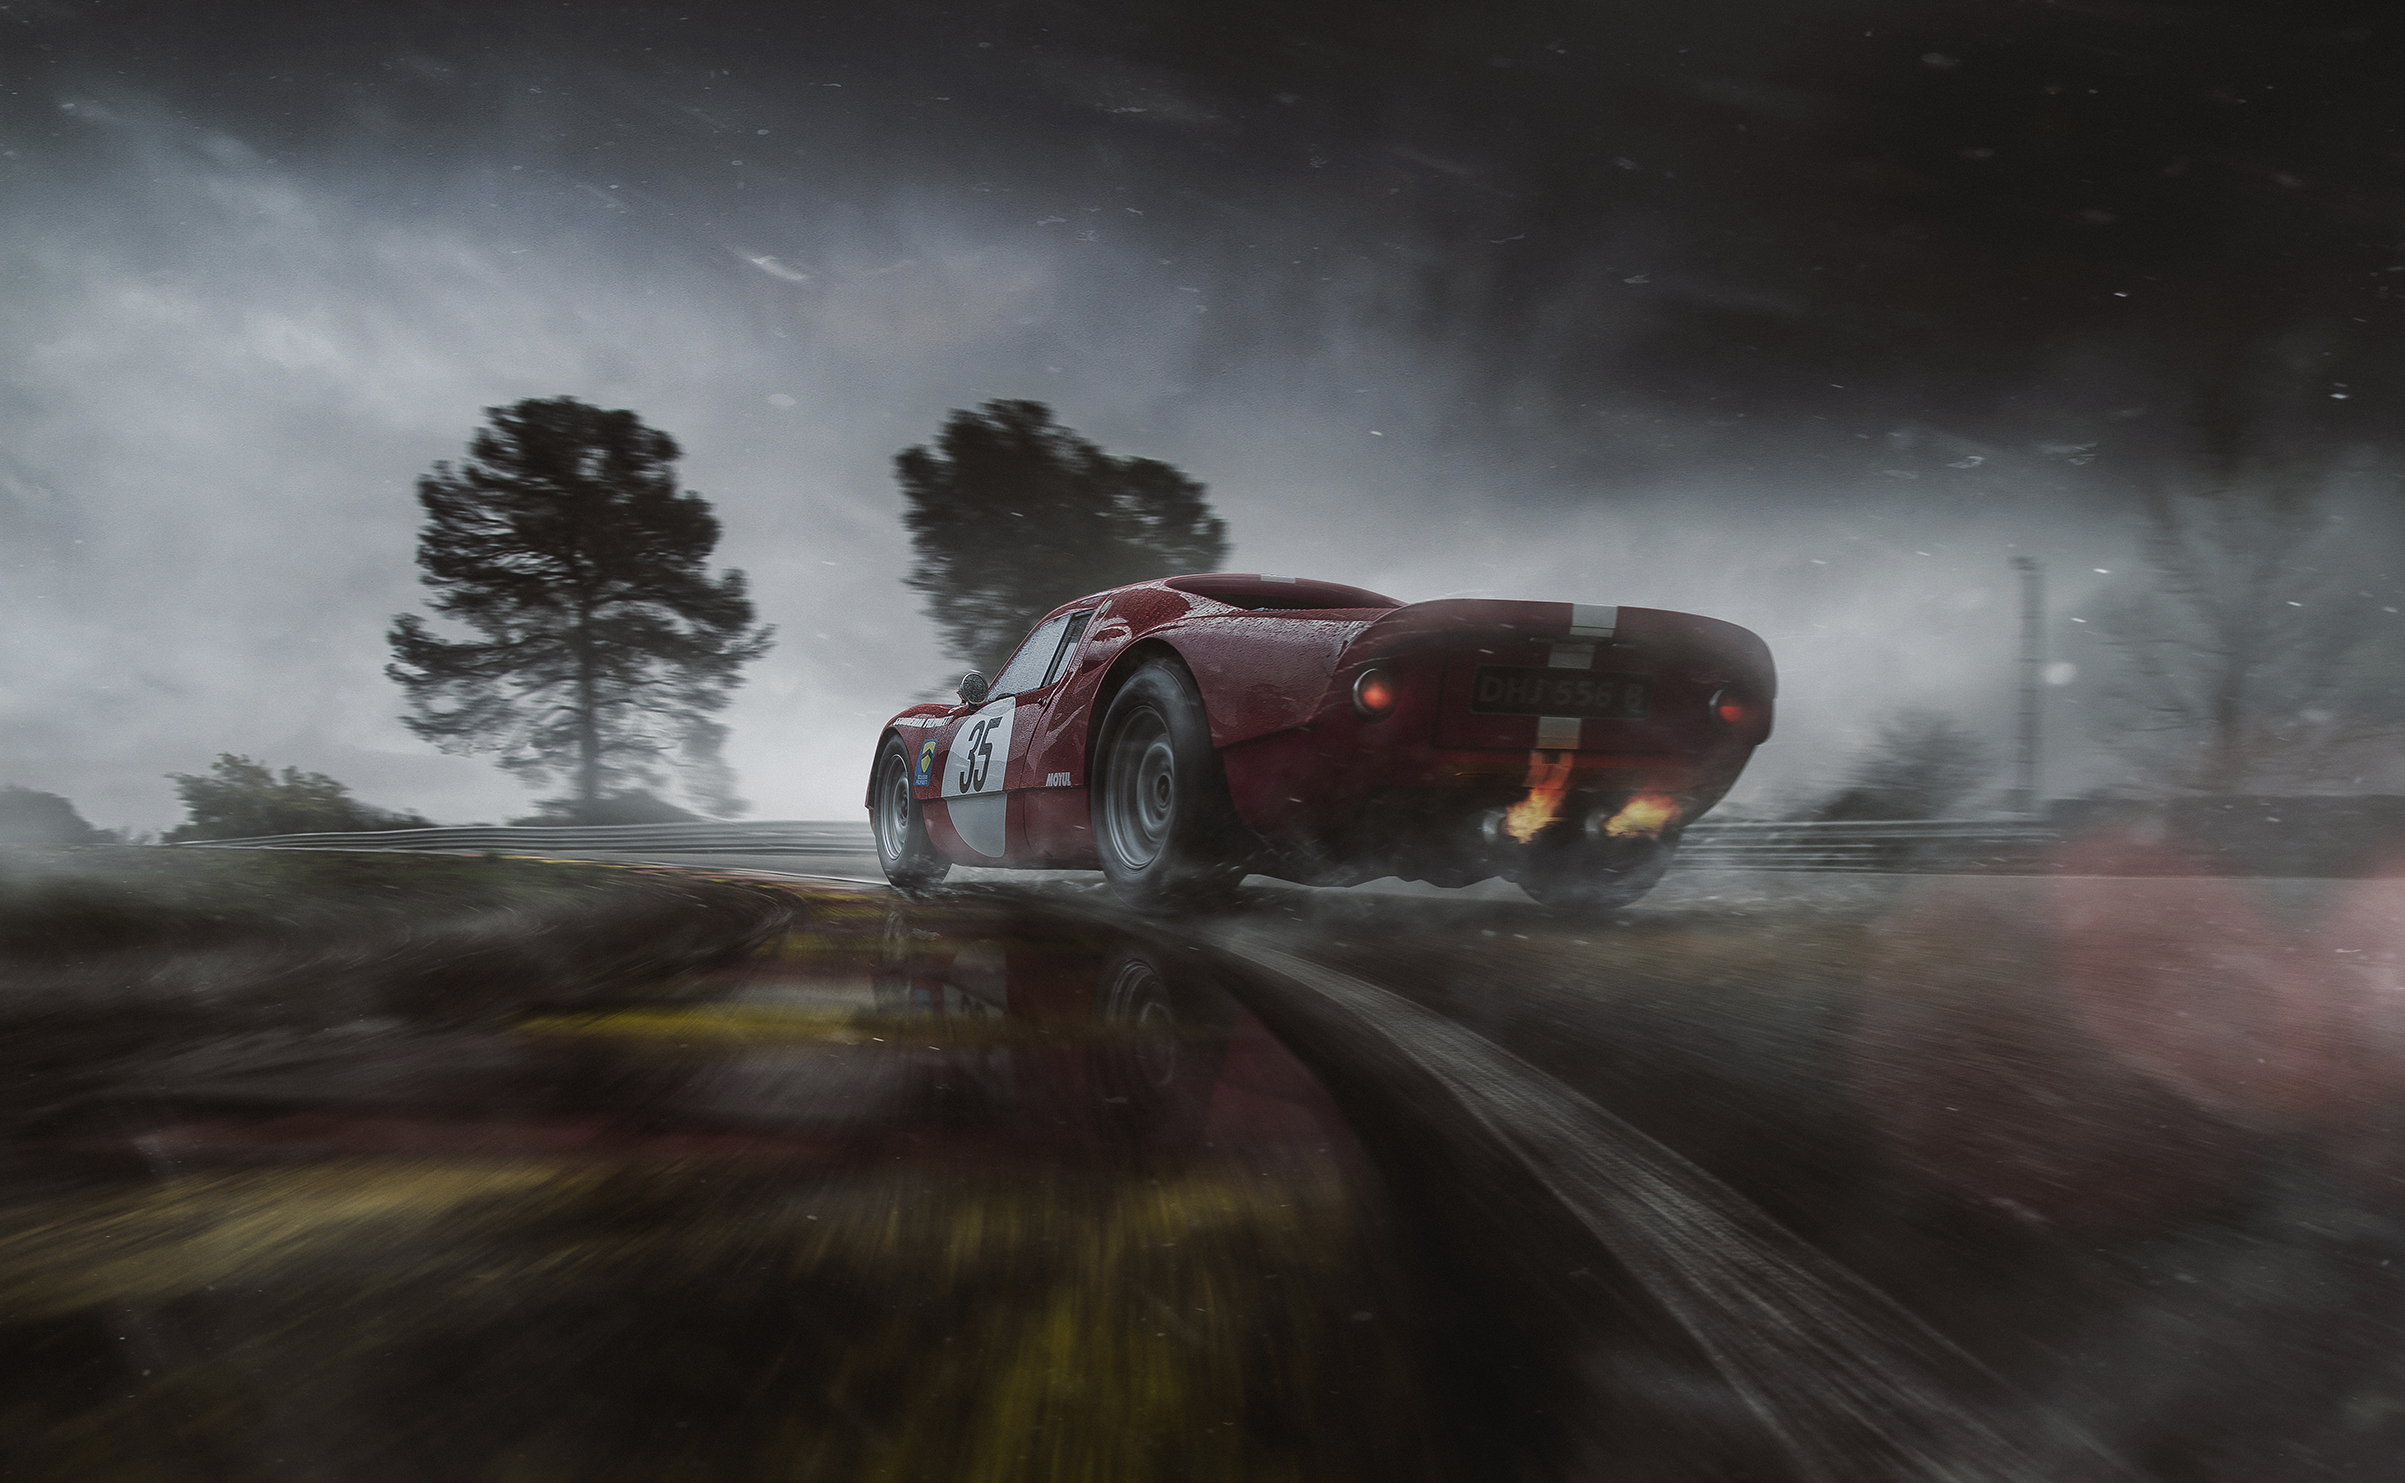 Photoshopped Porsche 904 in bad weather on racetrack